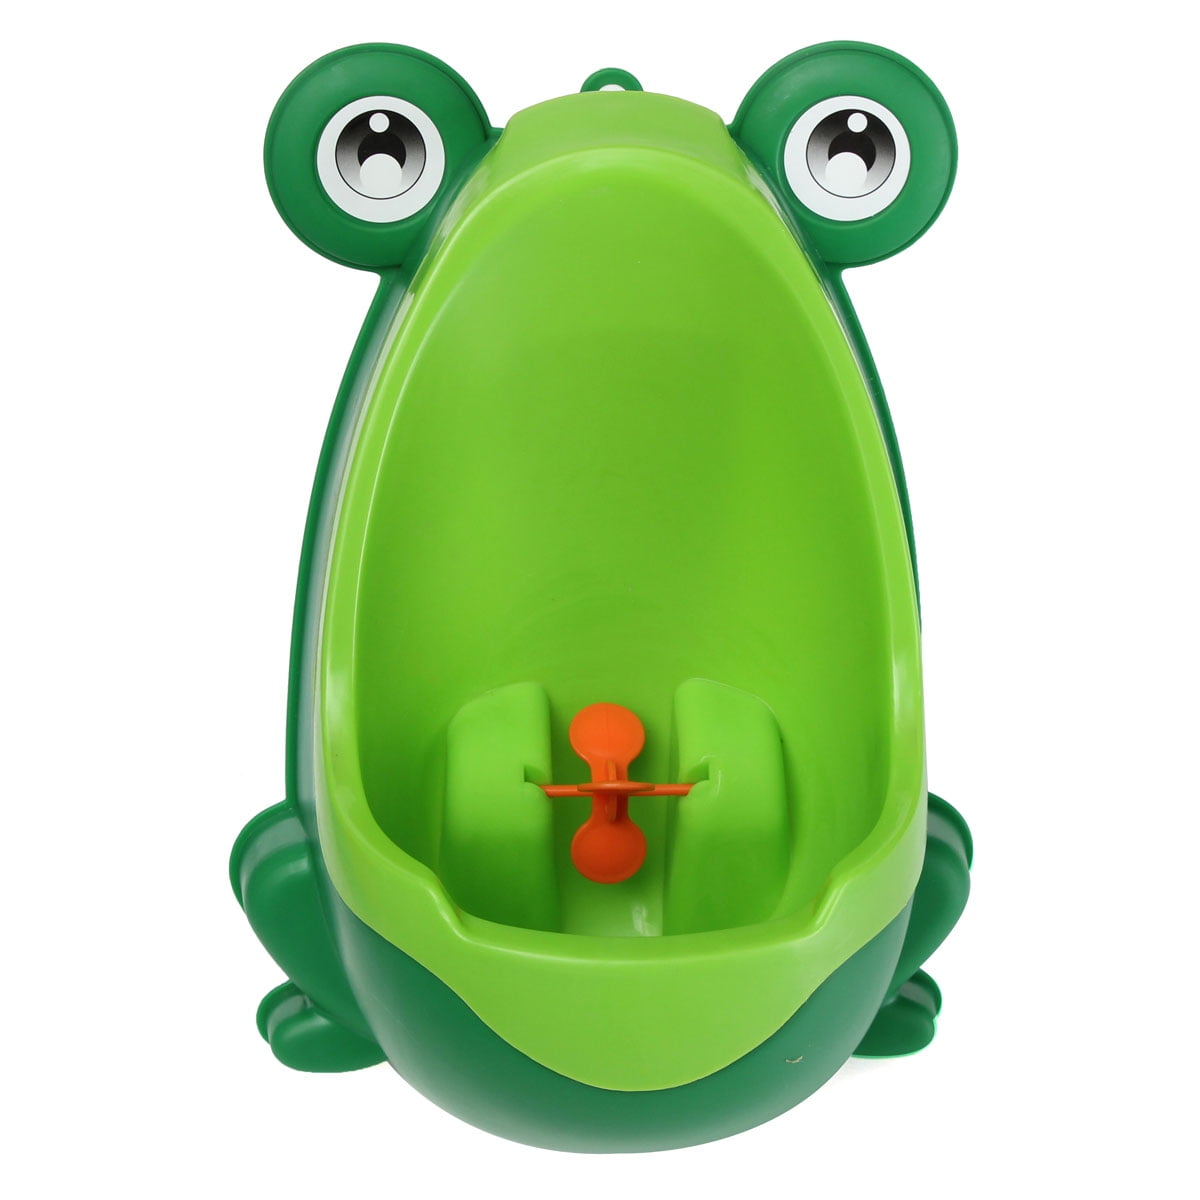 Green Frog Potty Training Urinal for Boys Toilet with Funny Aiming Target 